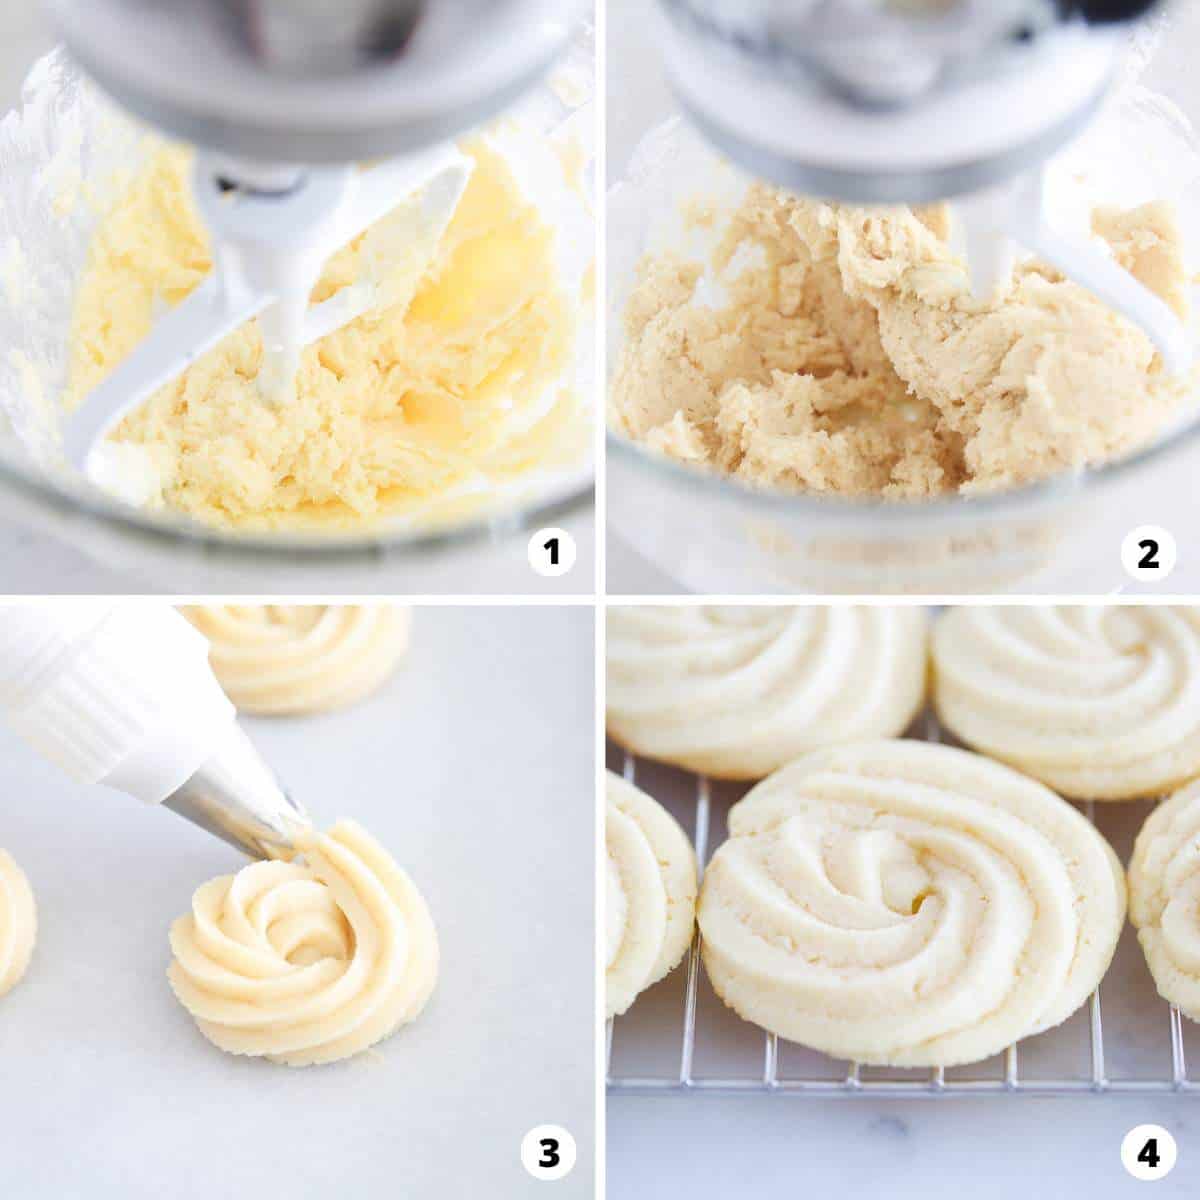 Showing how to make butter cookies in a 4 step collage.